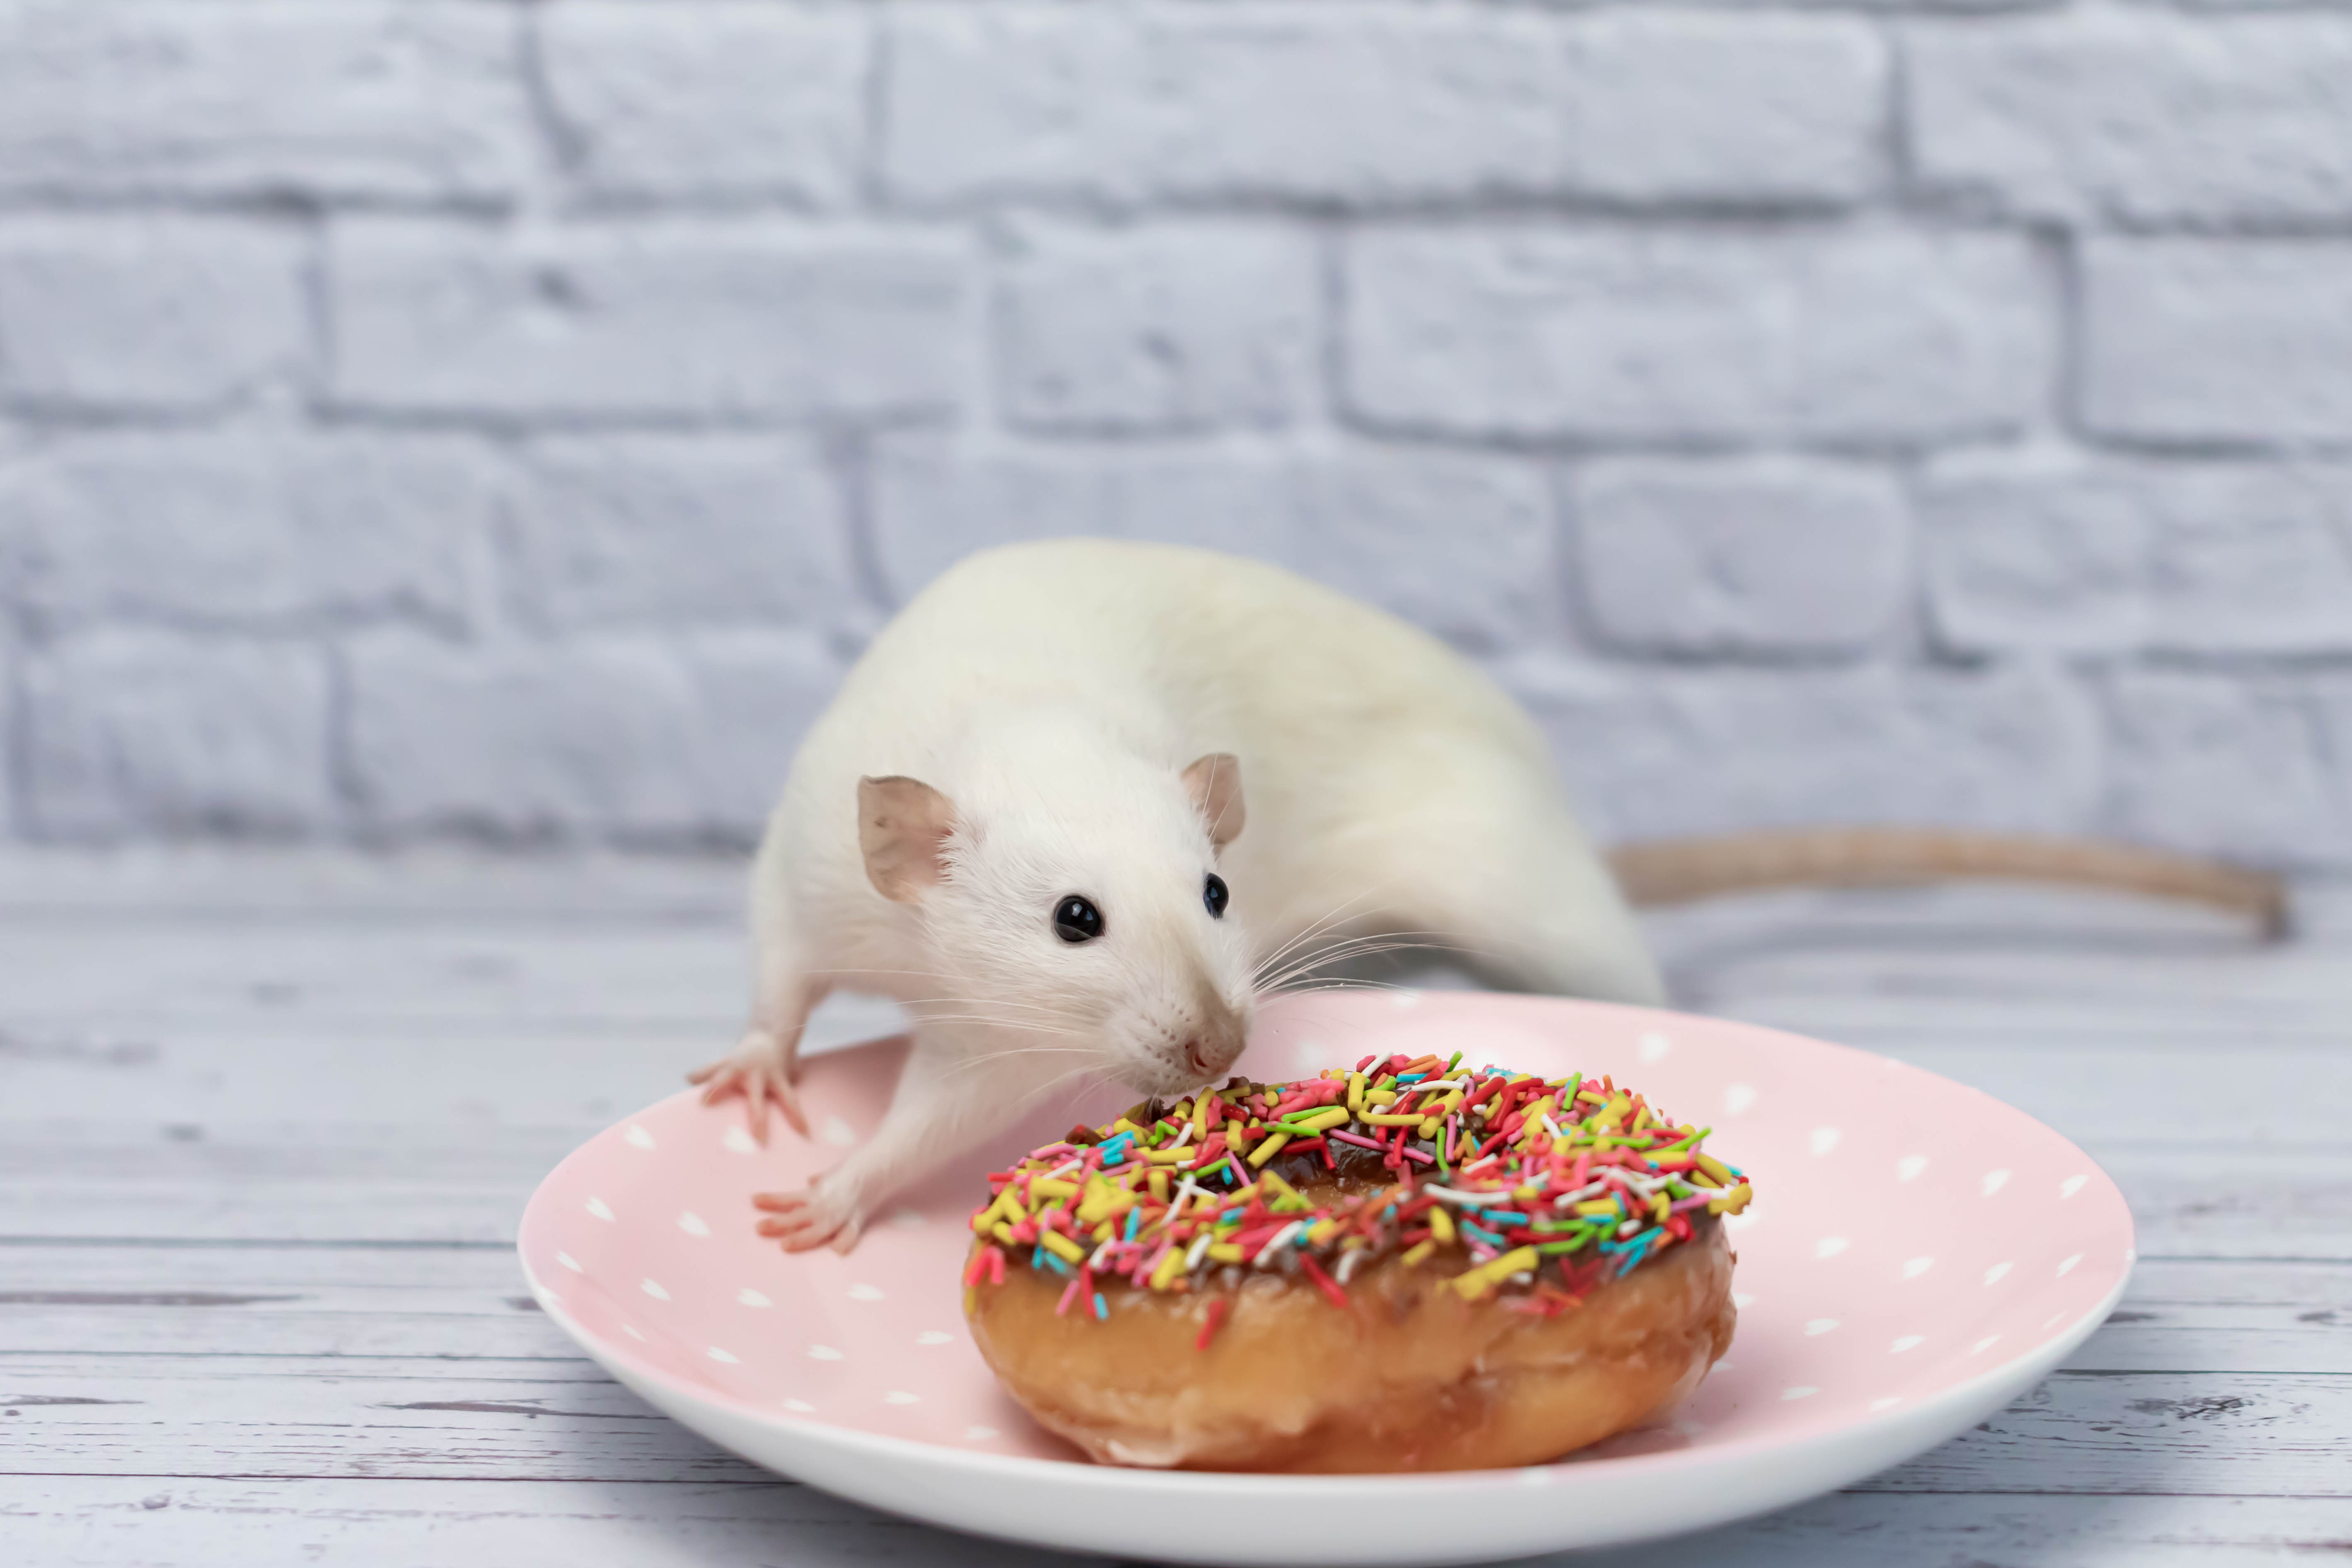 A white mouse creeps up to nibble on a delicious-looking donut 